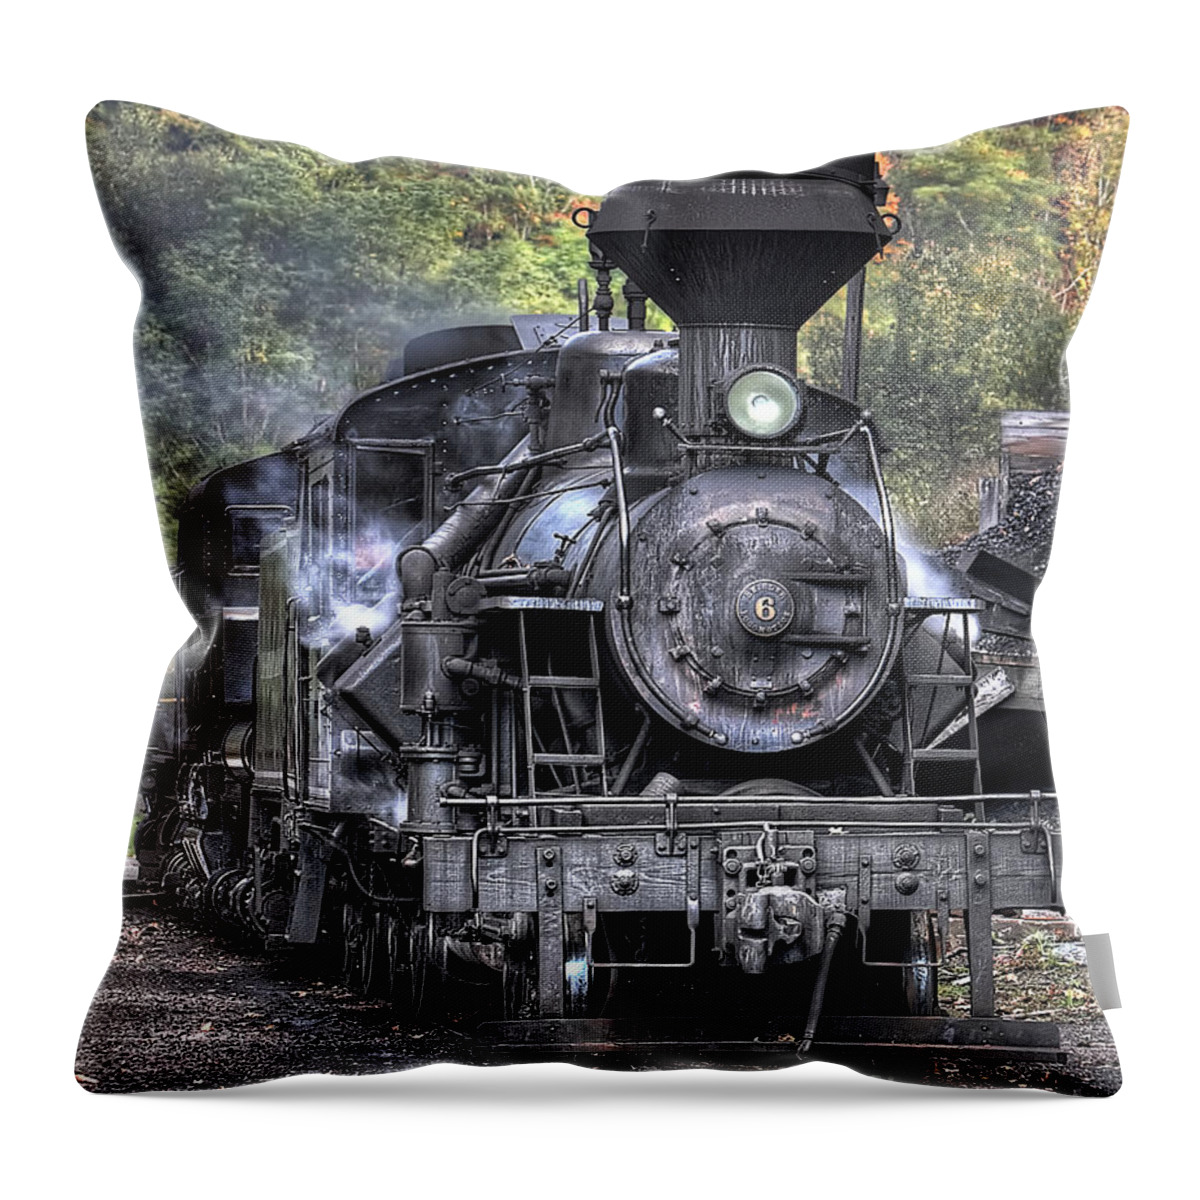 Antiquated Throw Pillow featuring the photograph Cass Railroad Engine No 6 by Jerry Fornarotto